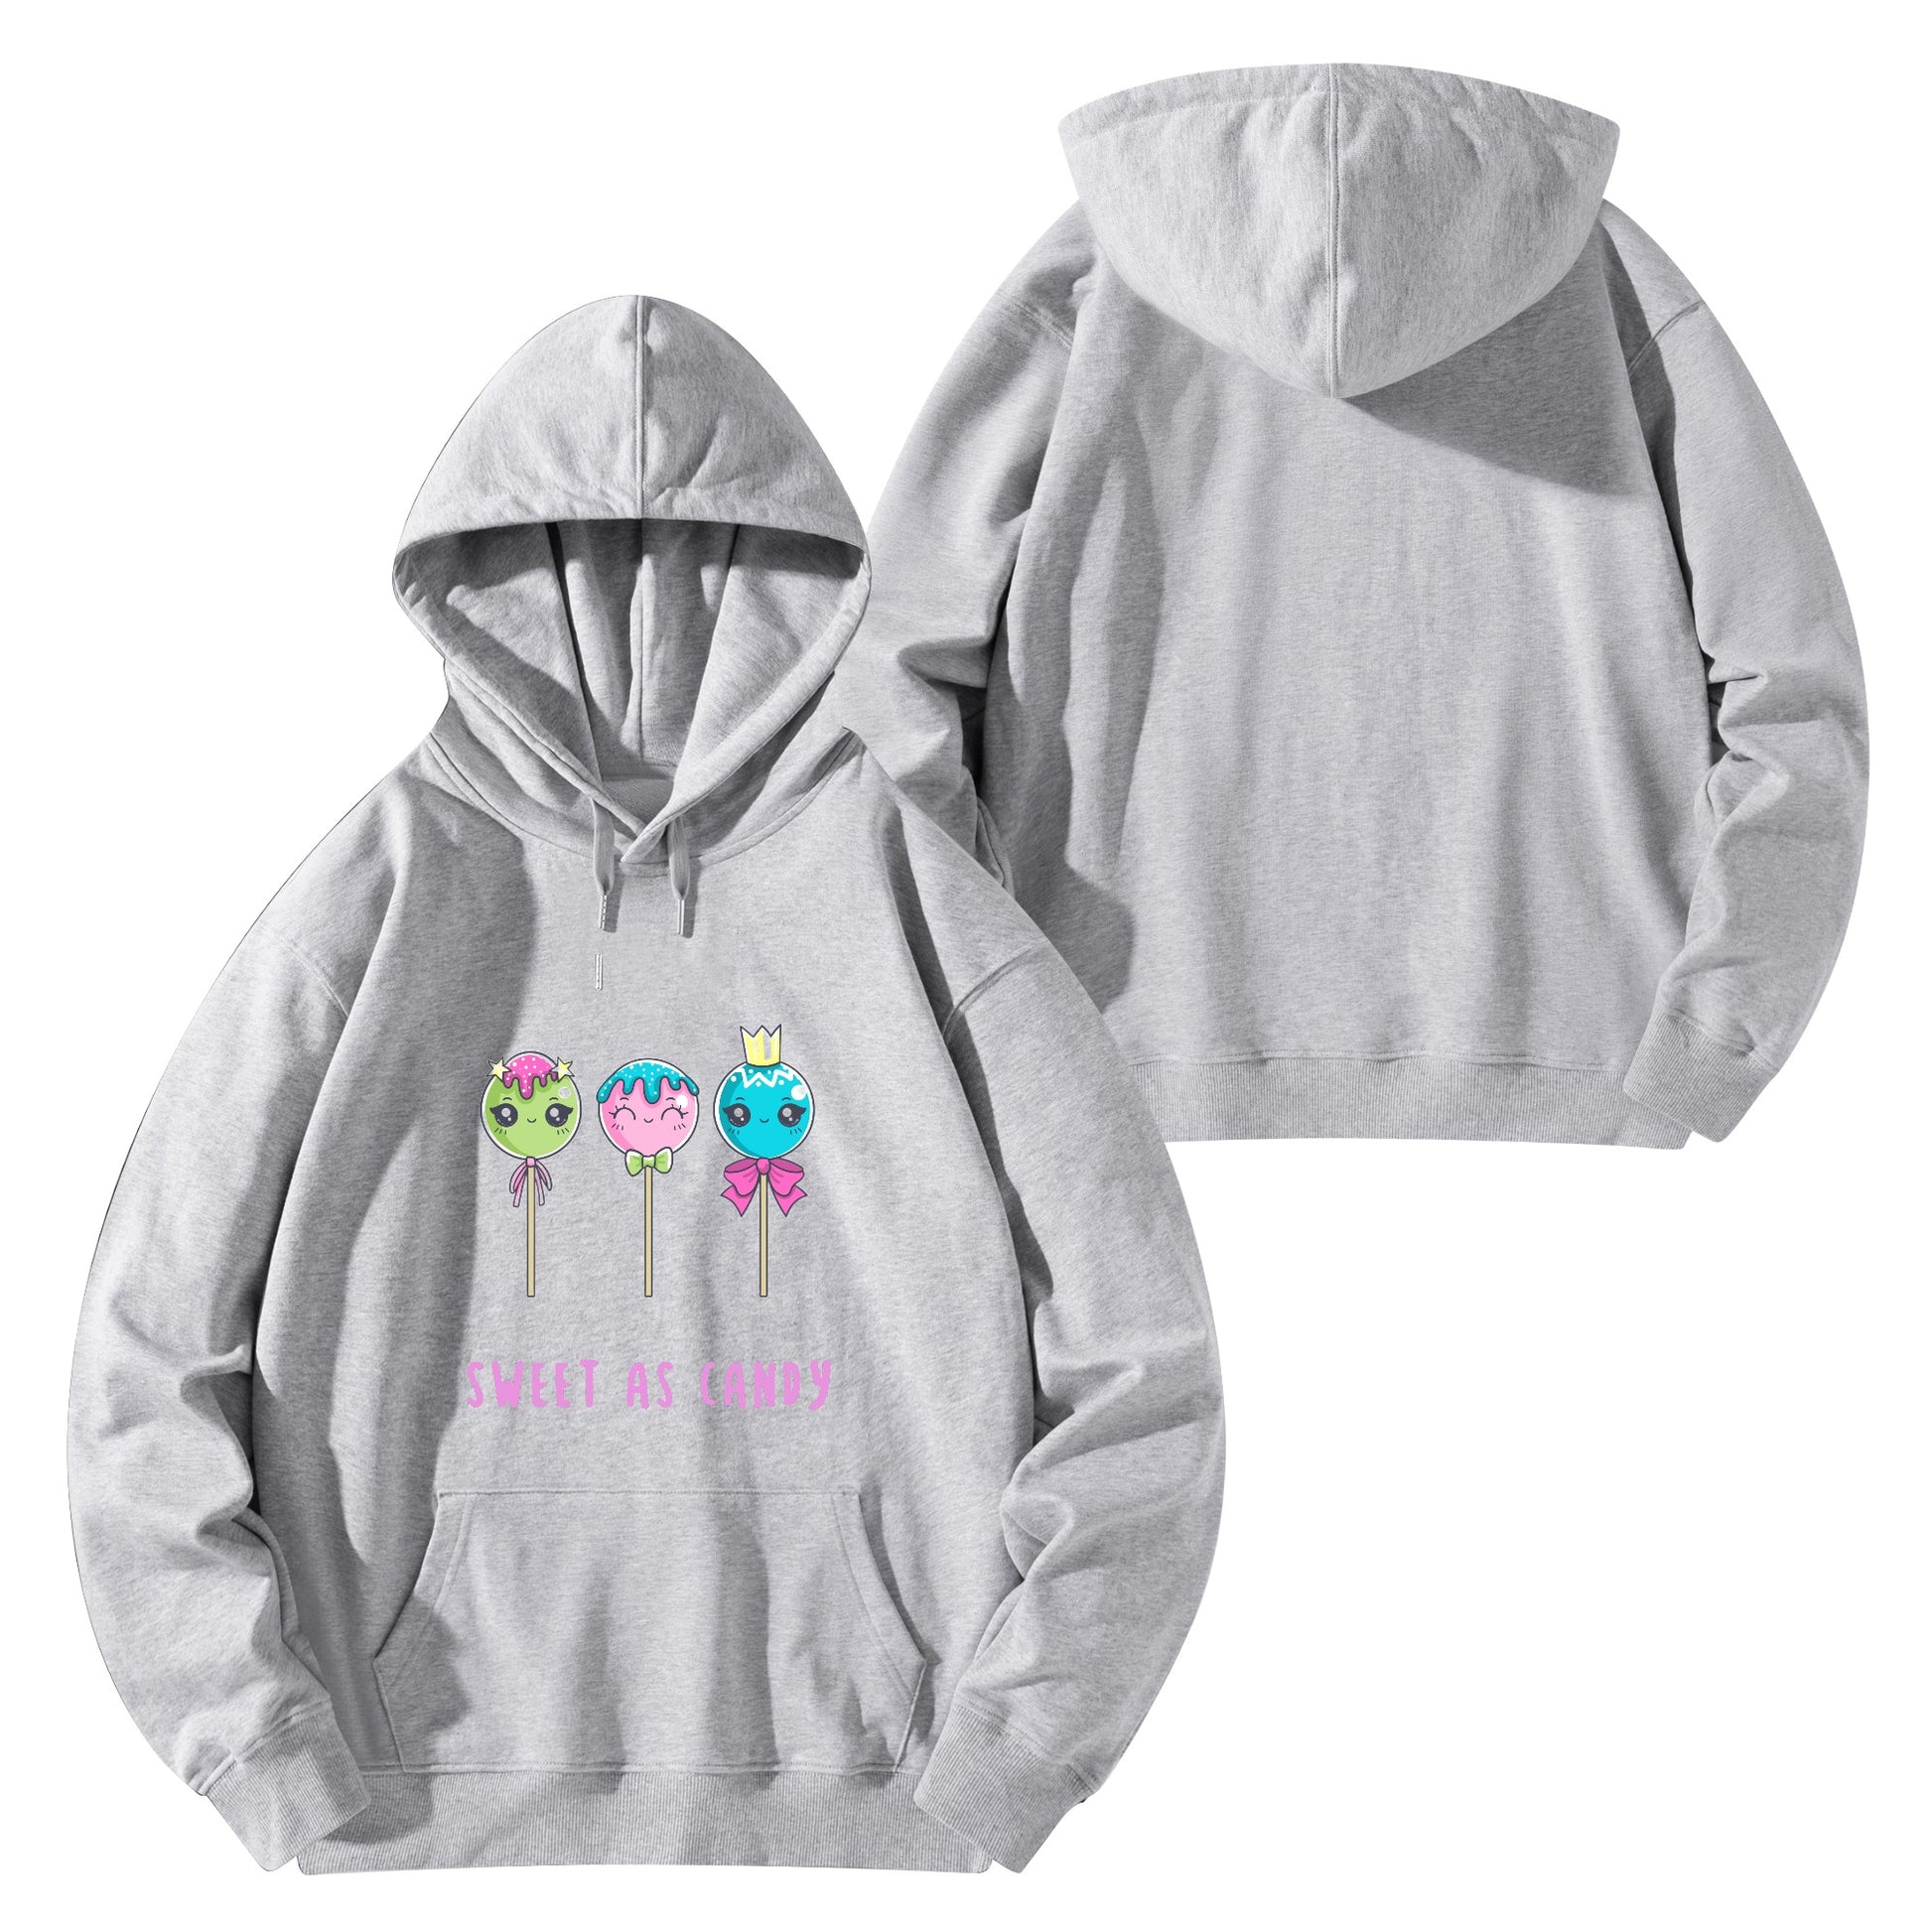 "Sweet as Candy" Adult Cotton Hoodie. Cute candy print